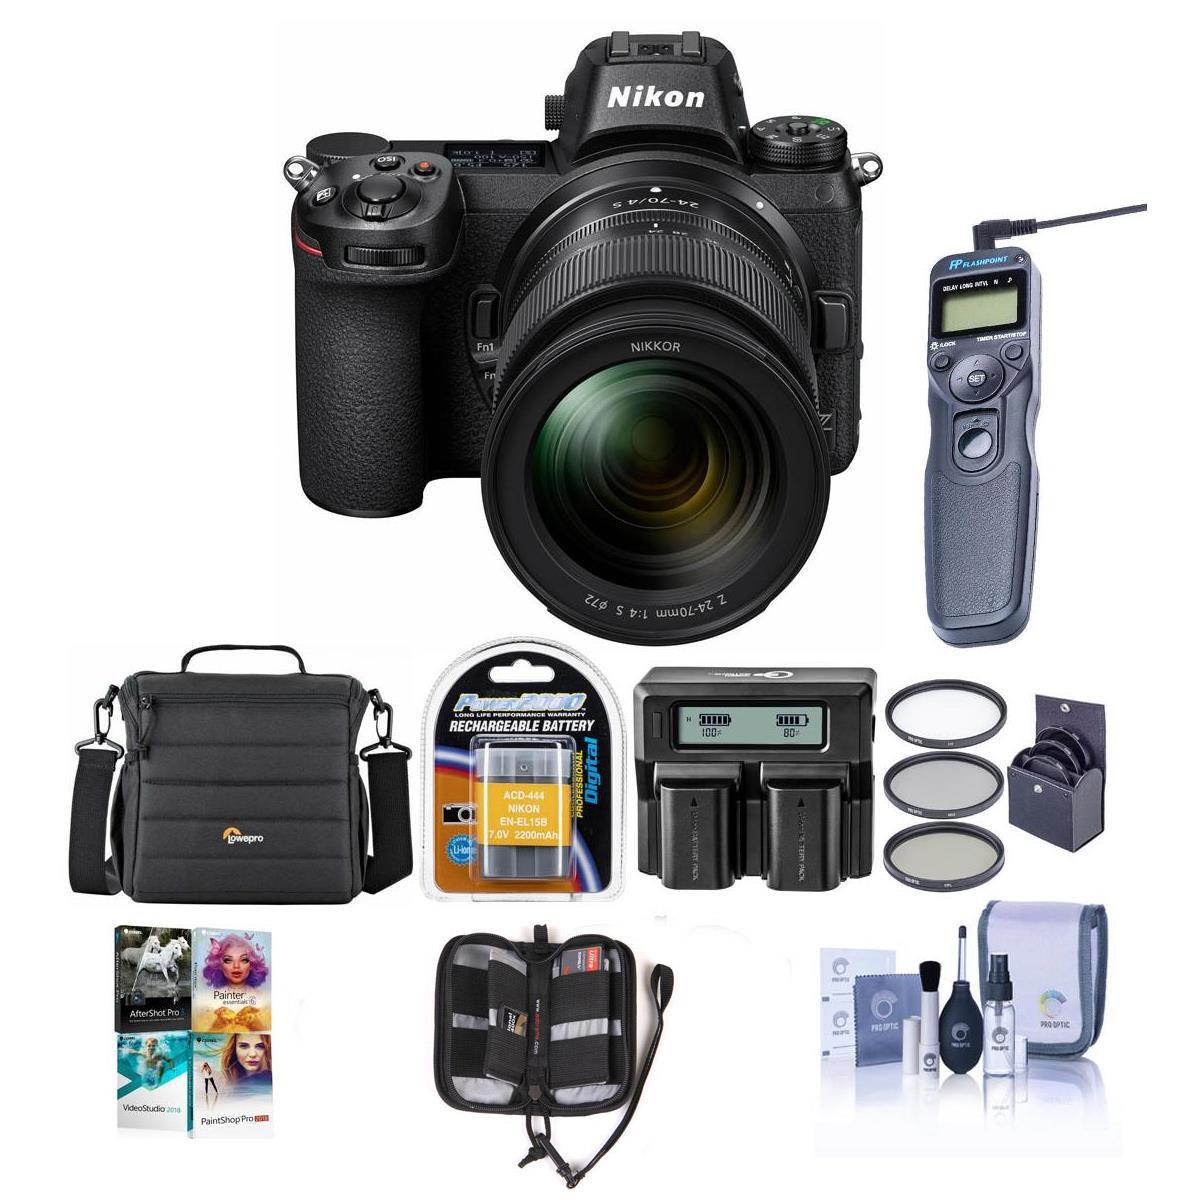 Nikon Z7 FX-Format Mirorless Camera with 24-70mm f/4 S Lens W/Free Accessory Kit